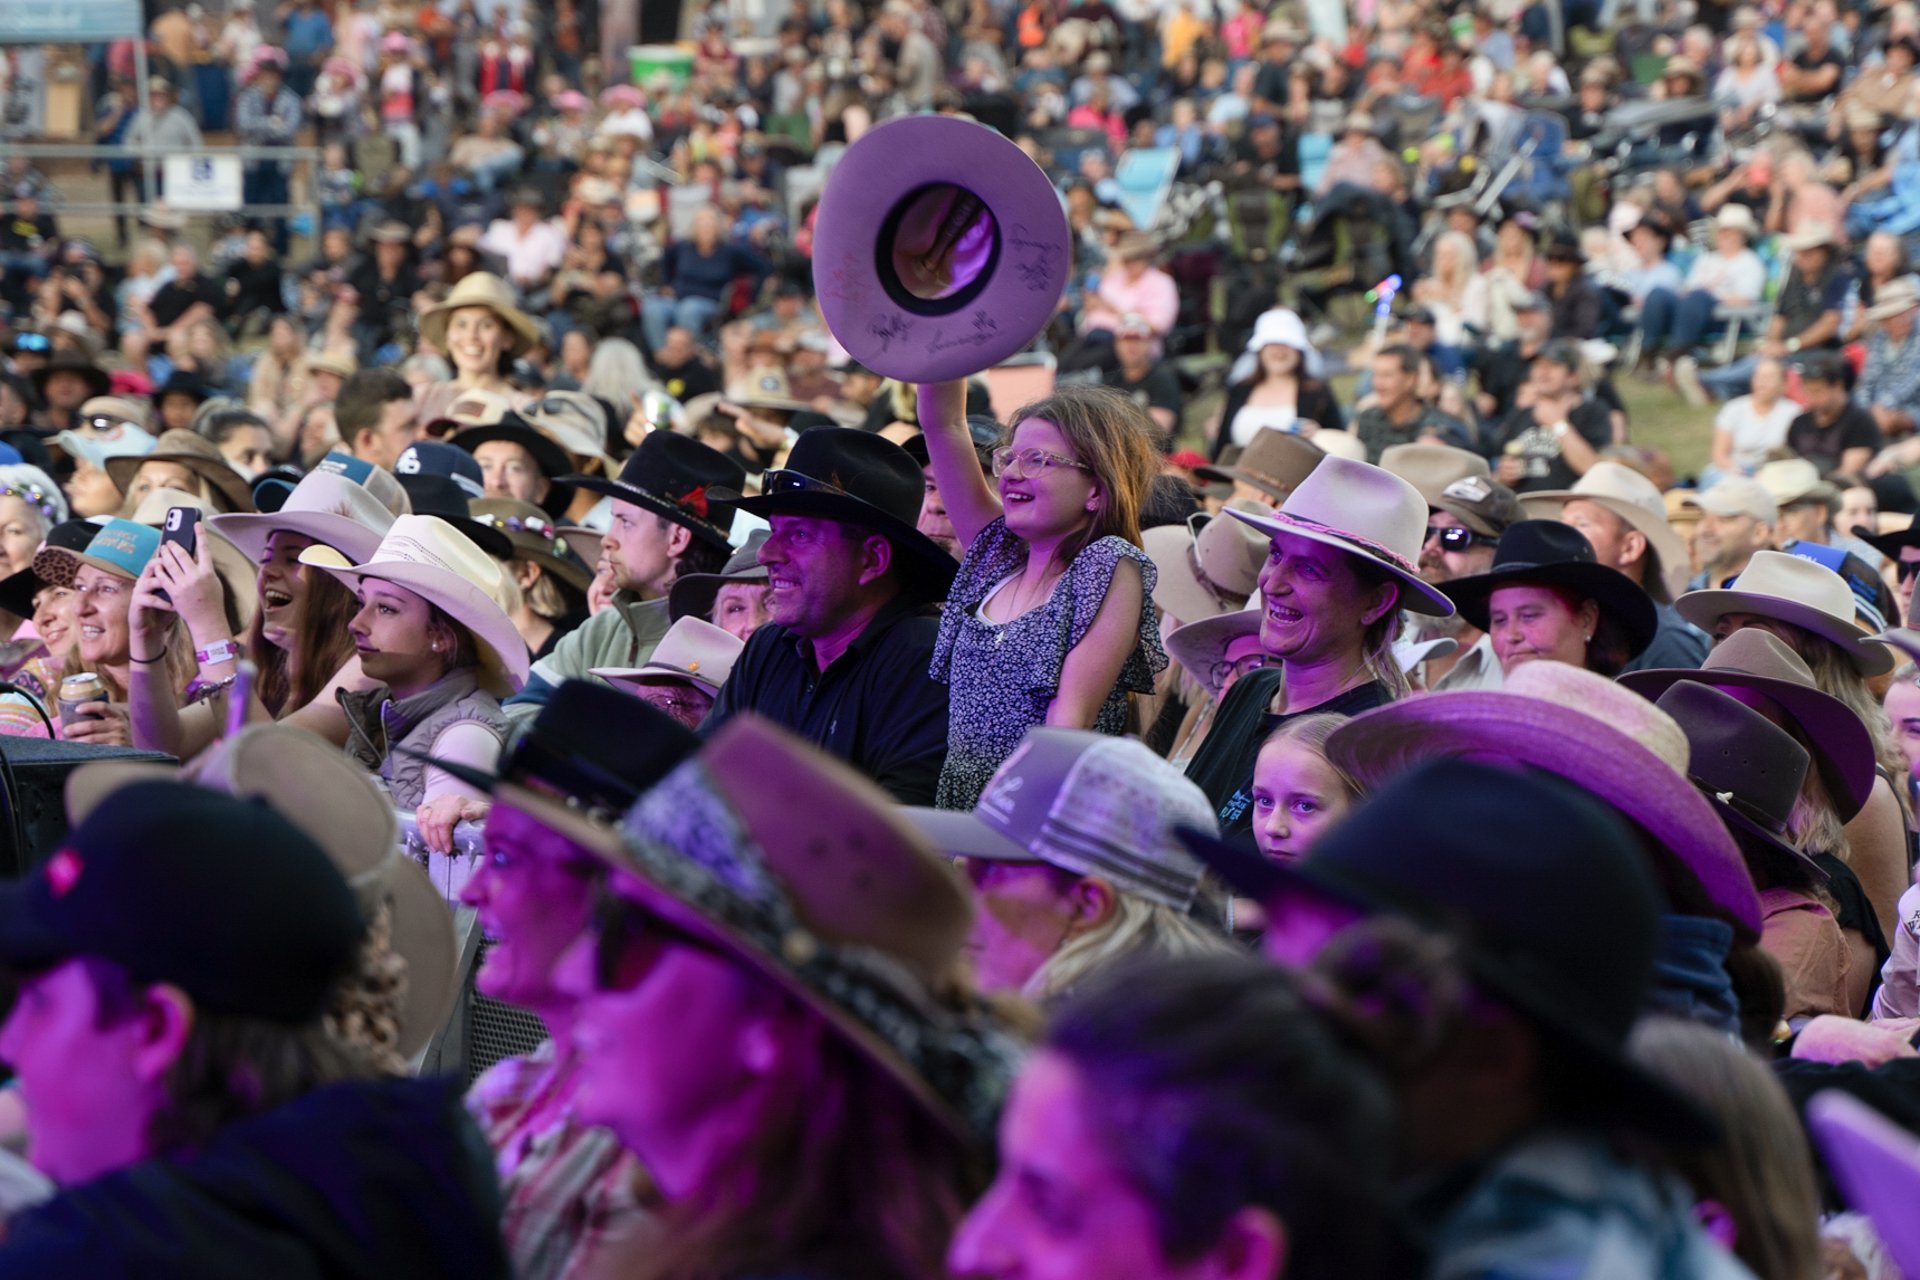  More than 20 years after it was released, Kasey Chambers awes the crowds - young and old - with her hit song “Not Pretty Enough” at the 2023 Gympie Music Muster. August 2023 // The Gympie Times 